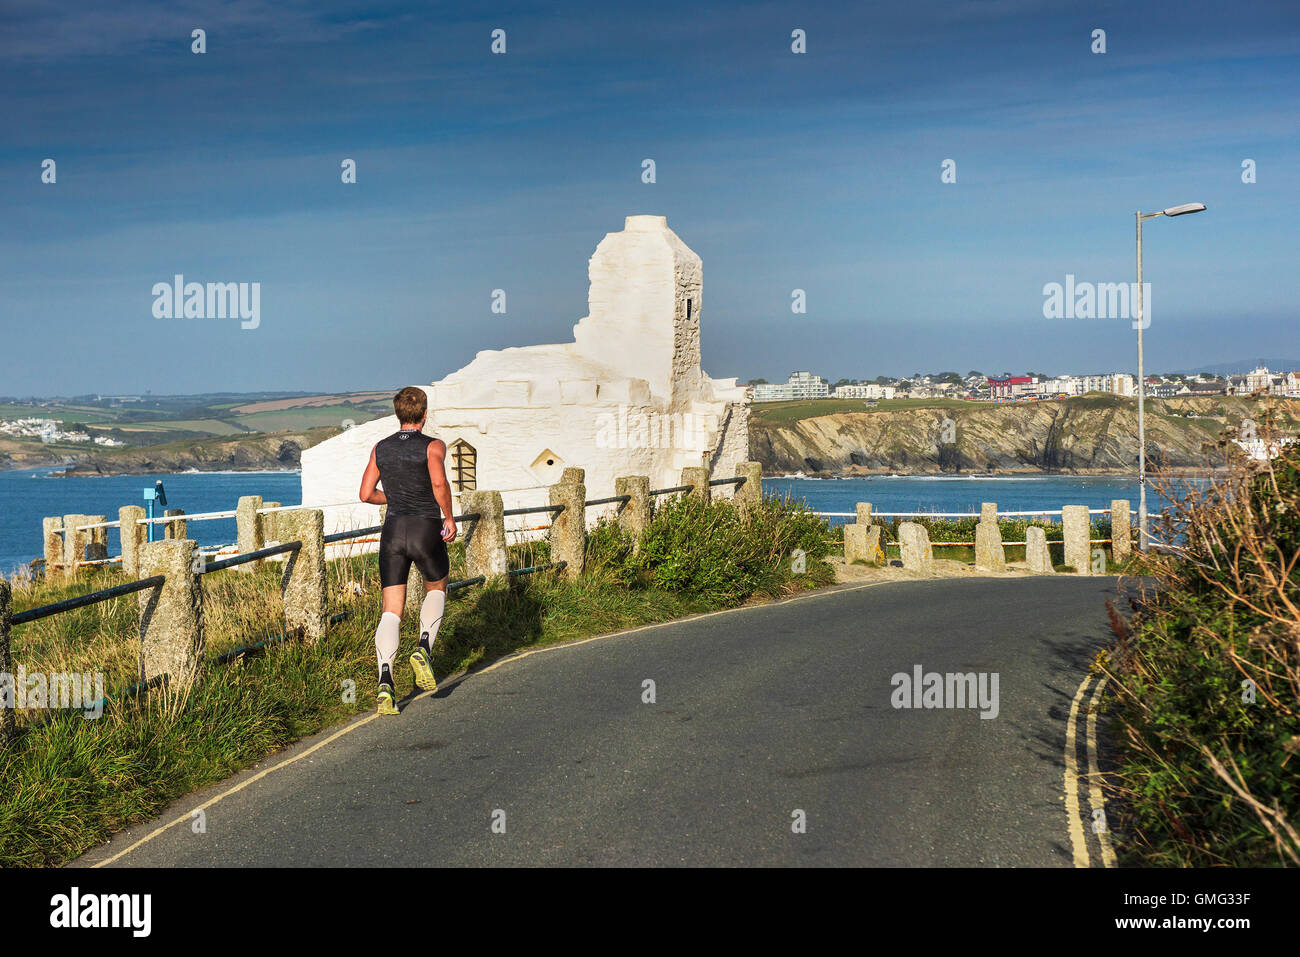 A jogger runs past the Grade II listed Huer’s Hut on the coast of Newquay in Cornwall. Stock Photo